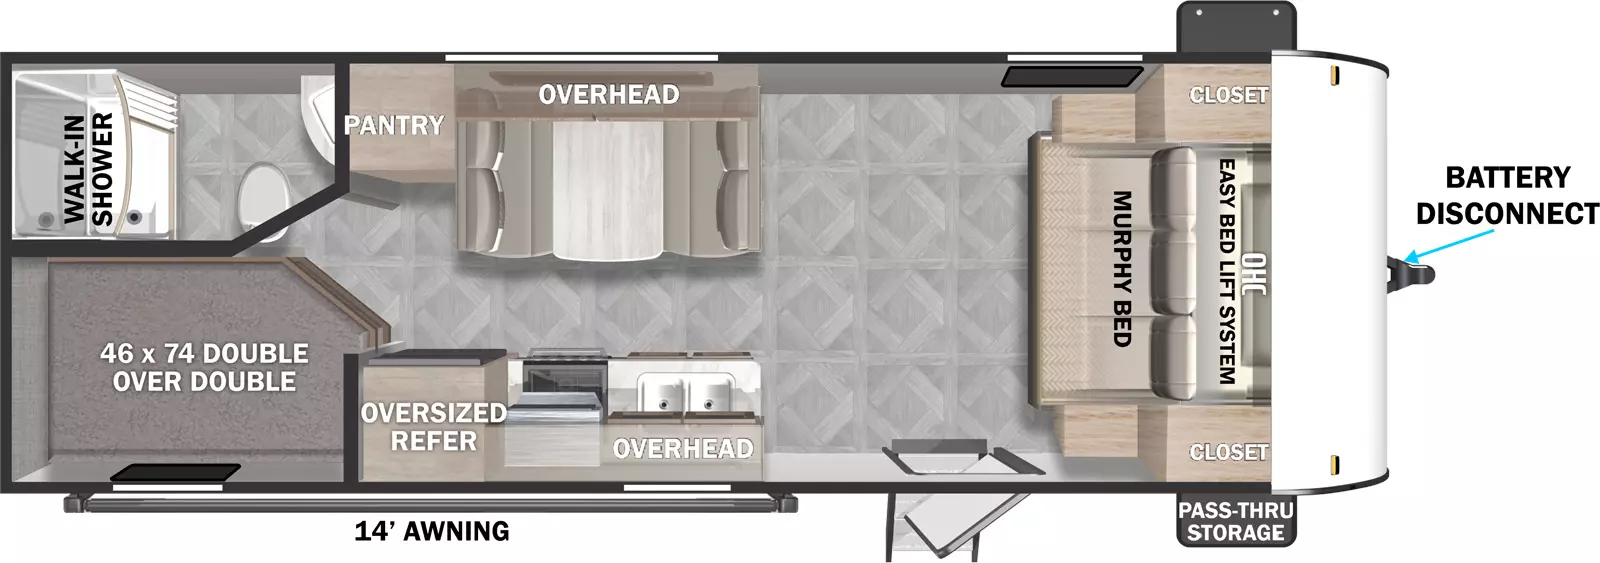 The 220BHXL has zero slideouts and one entry. Exteriors features front pass through storage, battery disconnect, and 14 foot awning. Interior layout front to back: murphy bed/sofa with easy bed lift system, overhead cabinet and closets on each side; off-door side dinette with overhead cabinet and pantry; door side entry, kitchen counter with sink, overhead cabinet, cooktop, and oversized refrigerator; rear off-door side full bathroom with walk-in closet; rear door side double over double bunks.